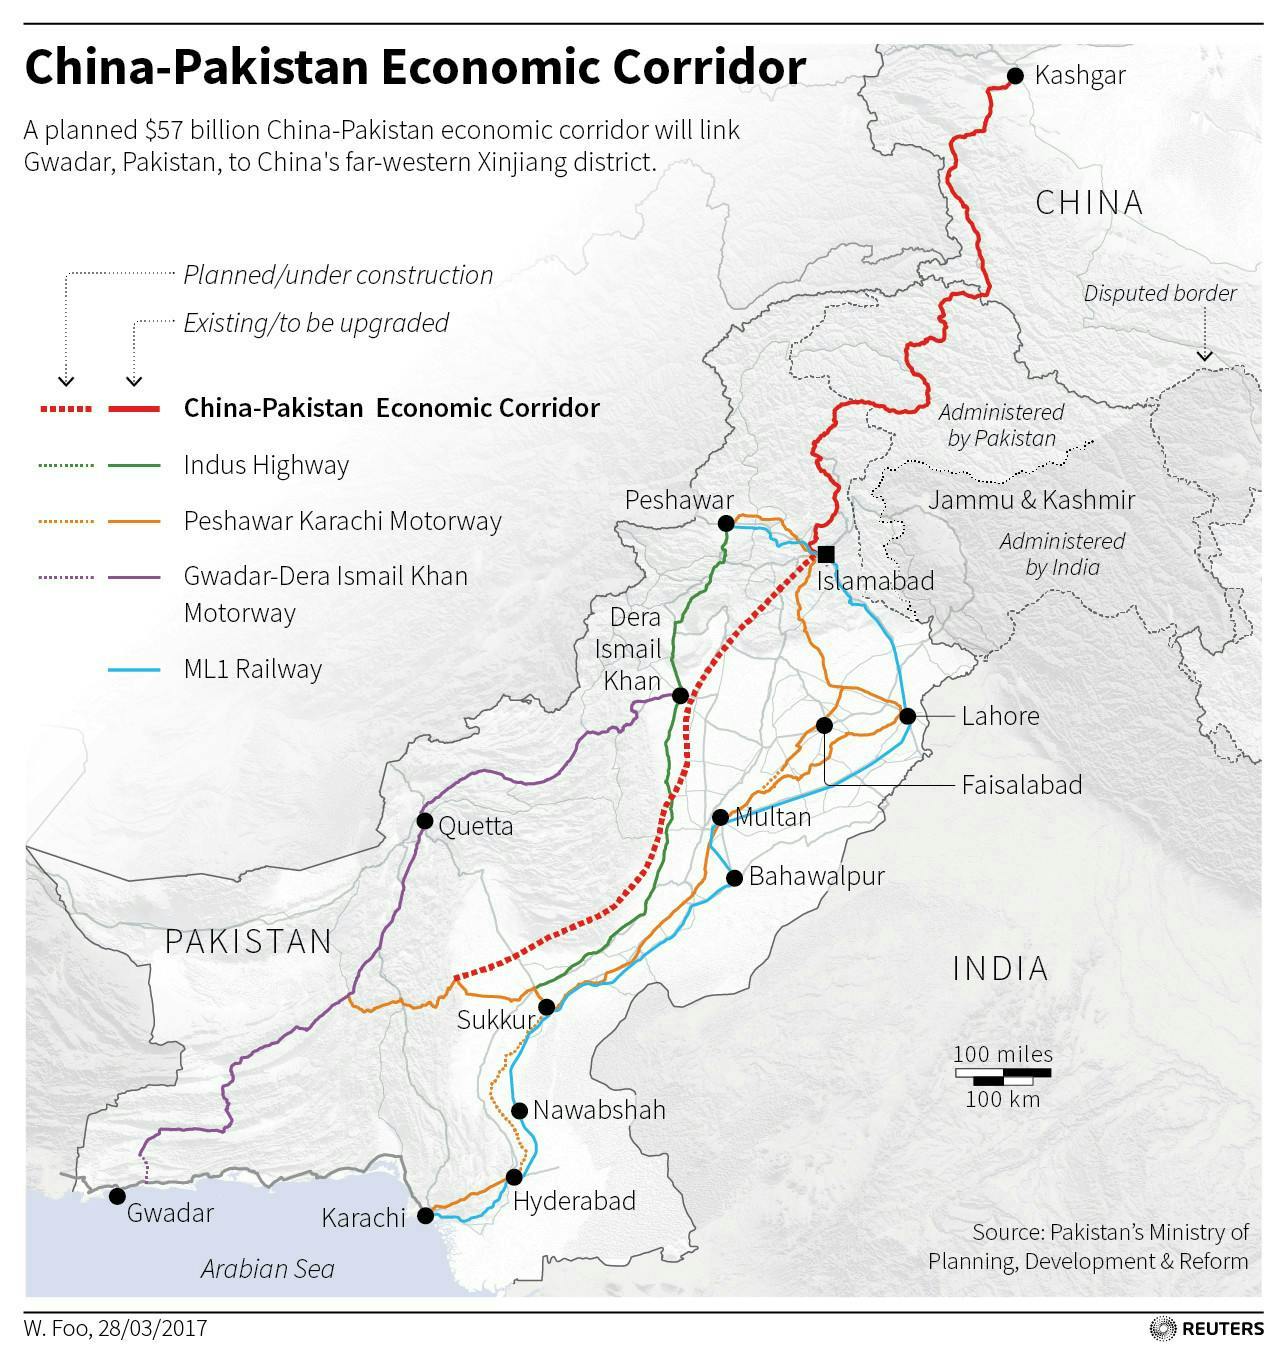 28 March 2017: Proposed highways and railways under CPEC. Source: Reuters